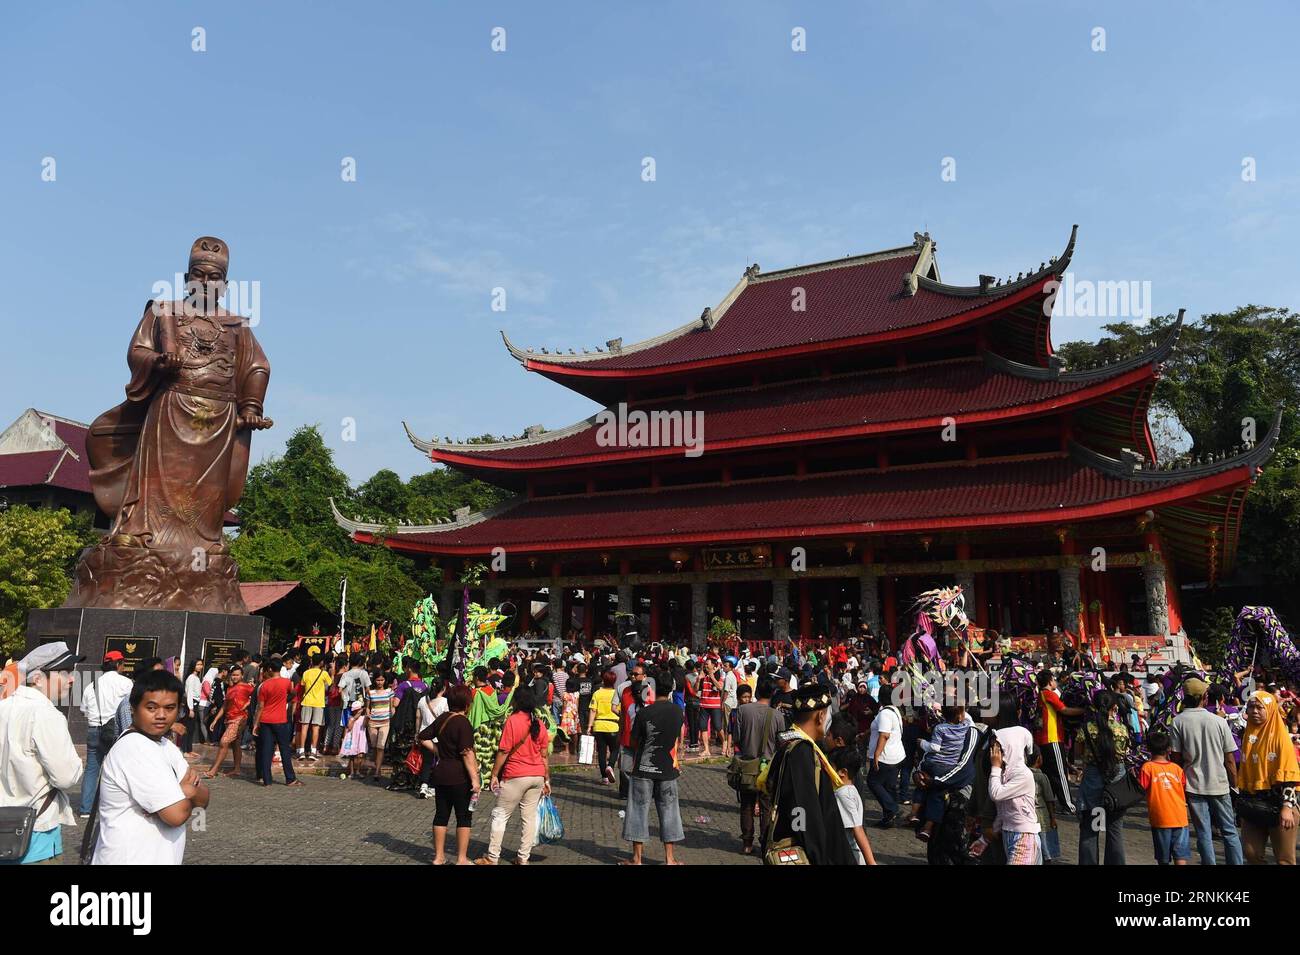 (170407) -- SEMARANG(INDONESIA), April 7, 2017 -- Photo taken on July 31, 2016 shows a ceremony held to commemorate the Chinese Ming Dynasty (1368-1644) navigator Zheng He s arrival at Semarang at the Sam Poo Kong Temple in Semarang, Indonesia. Chinese navy explorer Zheng He who visited the Central Java Province s port city of Semarang 600 years ago has an enduring legacy in the capital of the province. Arriving here at the beginning of the 15th century, Zheng He made a cave on the Simongan Hill as his temporary abode and repaired his ships. During his stay, Zheng He built a mosque and set up Stock Photo